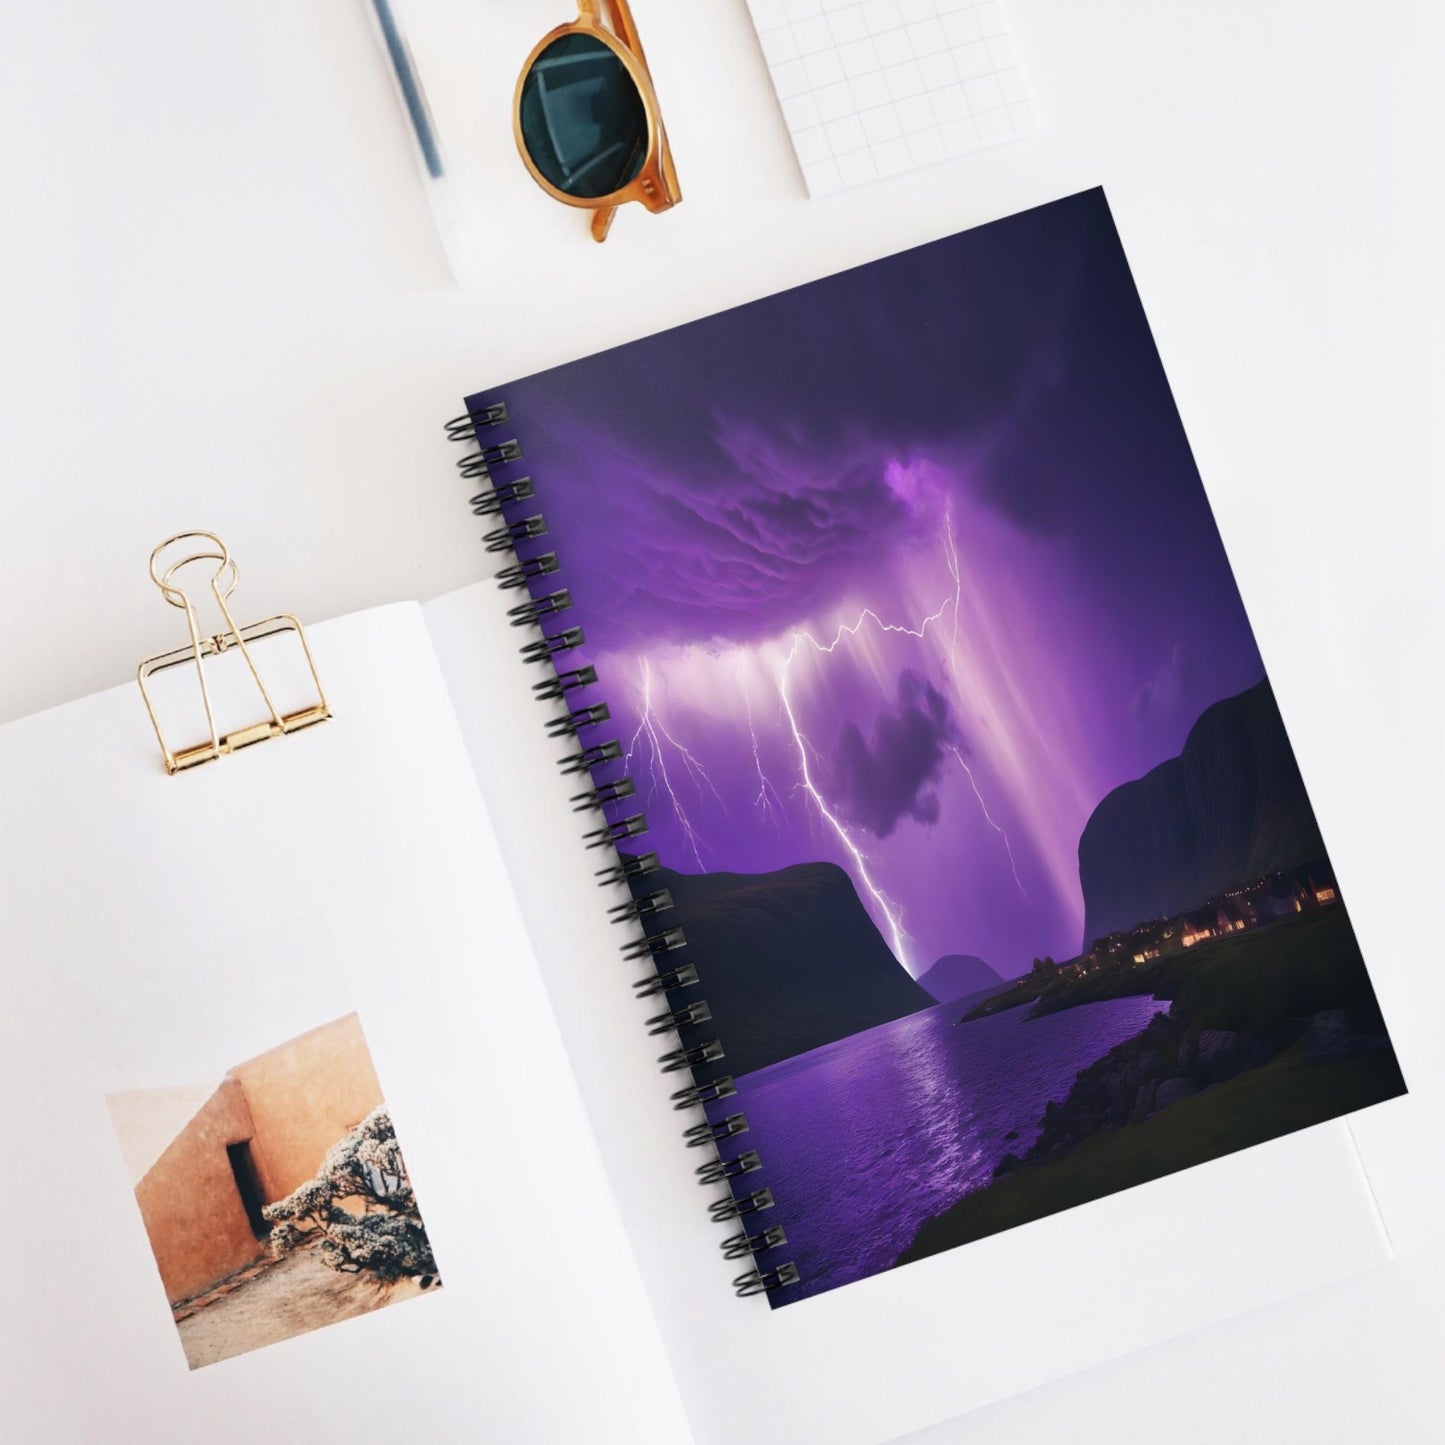 Unique Aurora Borealis Spiral Notebook Ruled Line - Personalized Northern Light View - Stationary Accessories - Perfect Aurora Lovers Gift 26